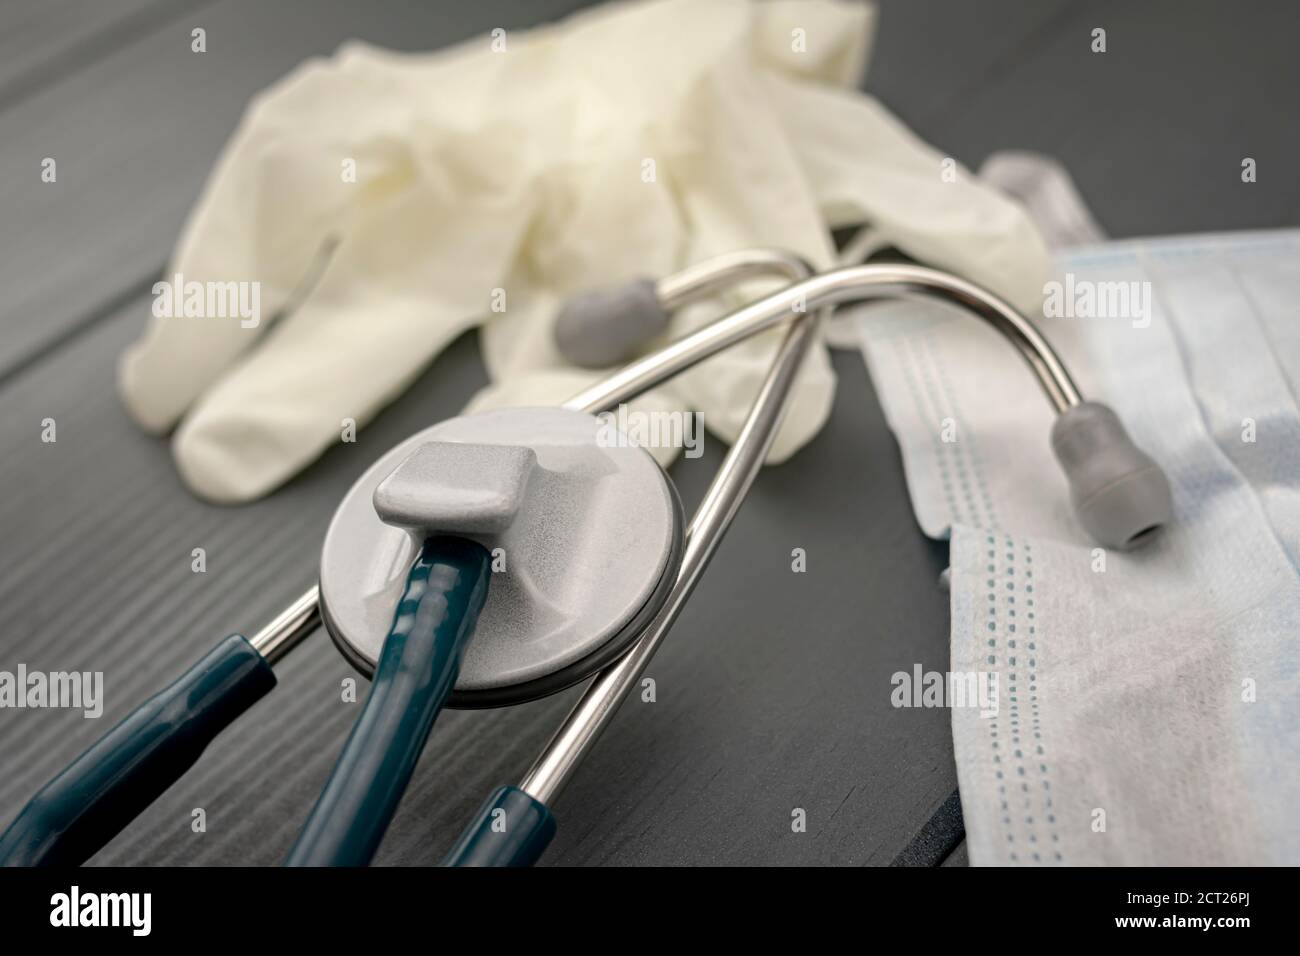 Personal protective equipment for doctors and nurses in a Hospital. Gloves, stethoscope and face mask. Stock Photo